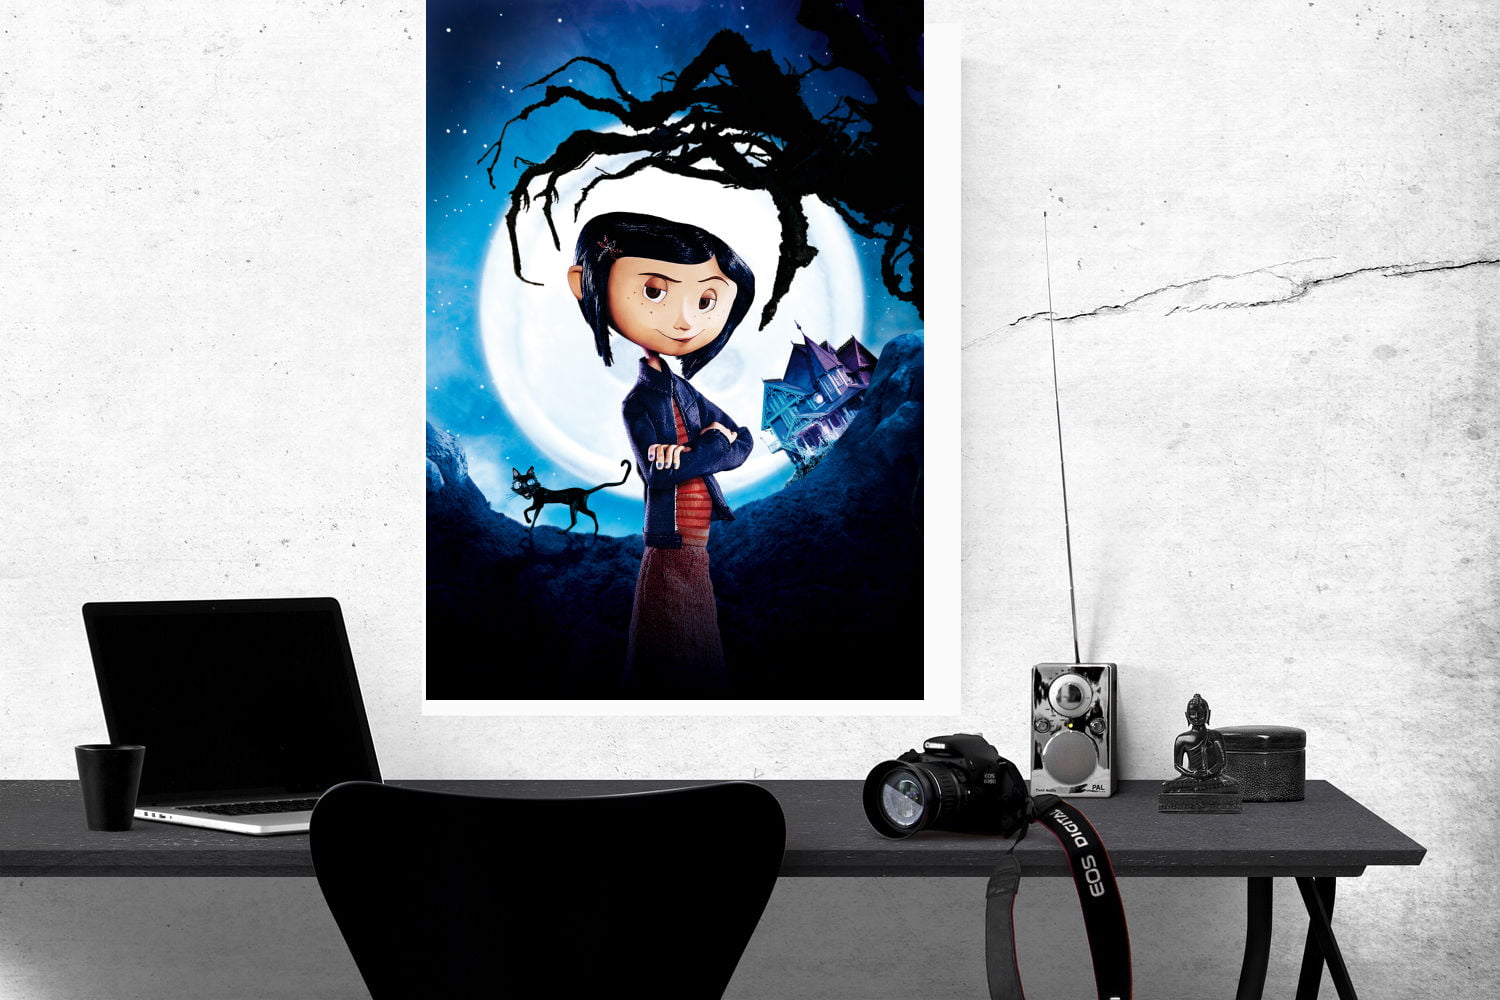 Horror Movie Poster Coraline Poster Anime Movie Canvas Art Poster Wall  Picture Print Modern Family Bedroom Decor Posters - AliExpress